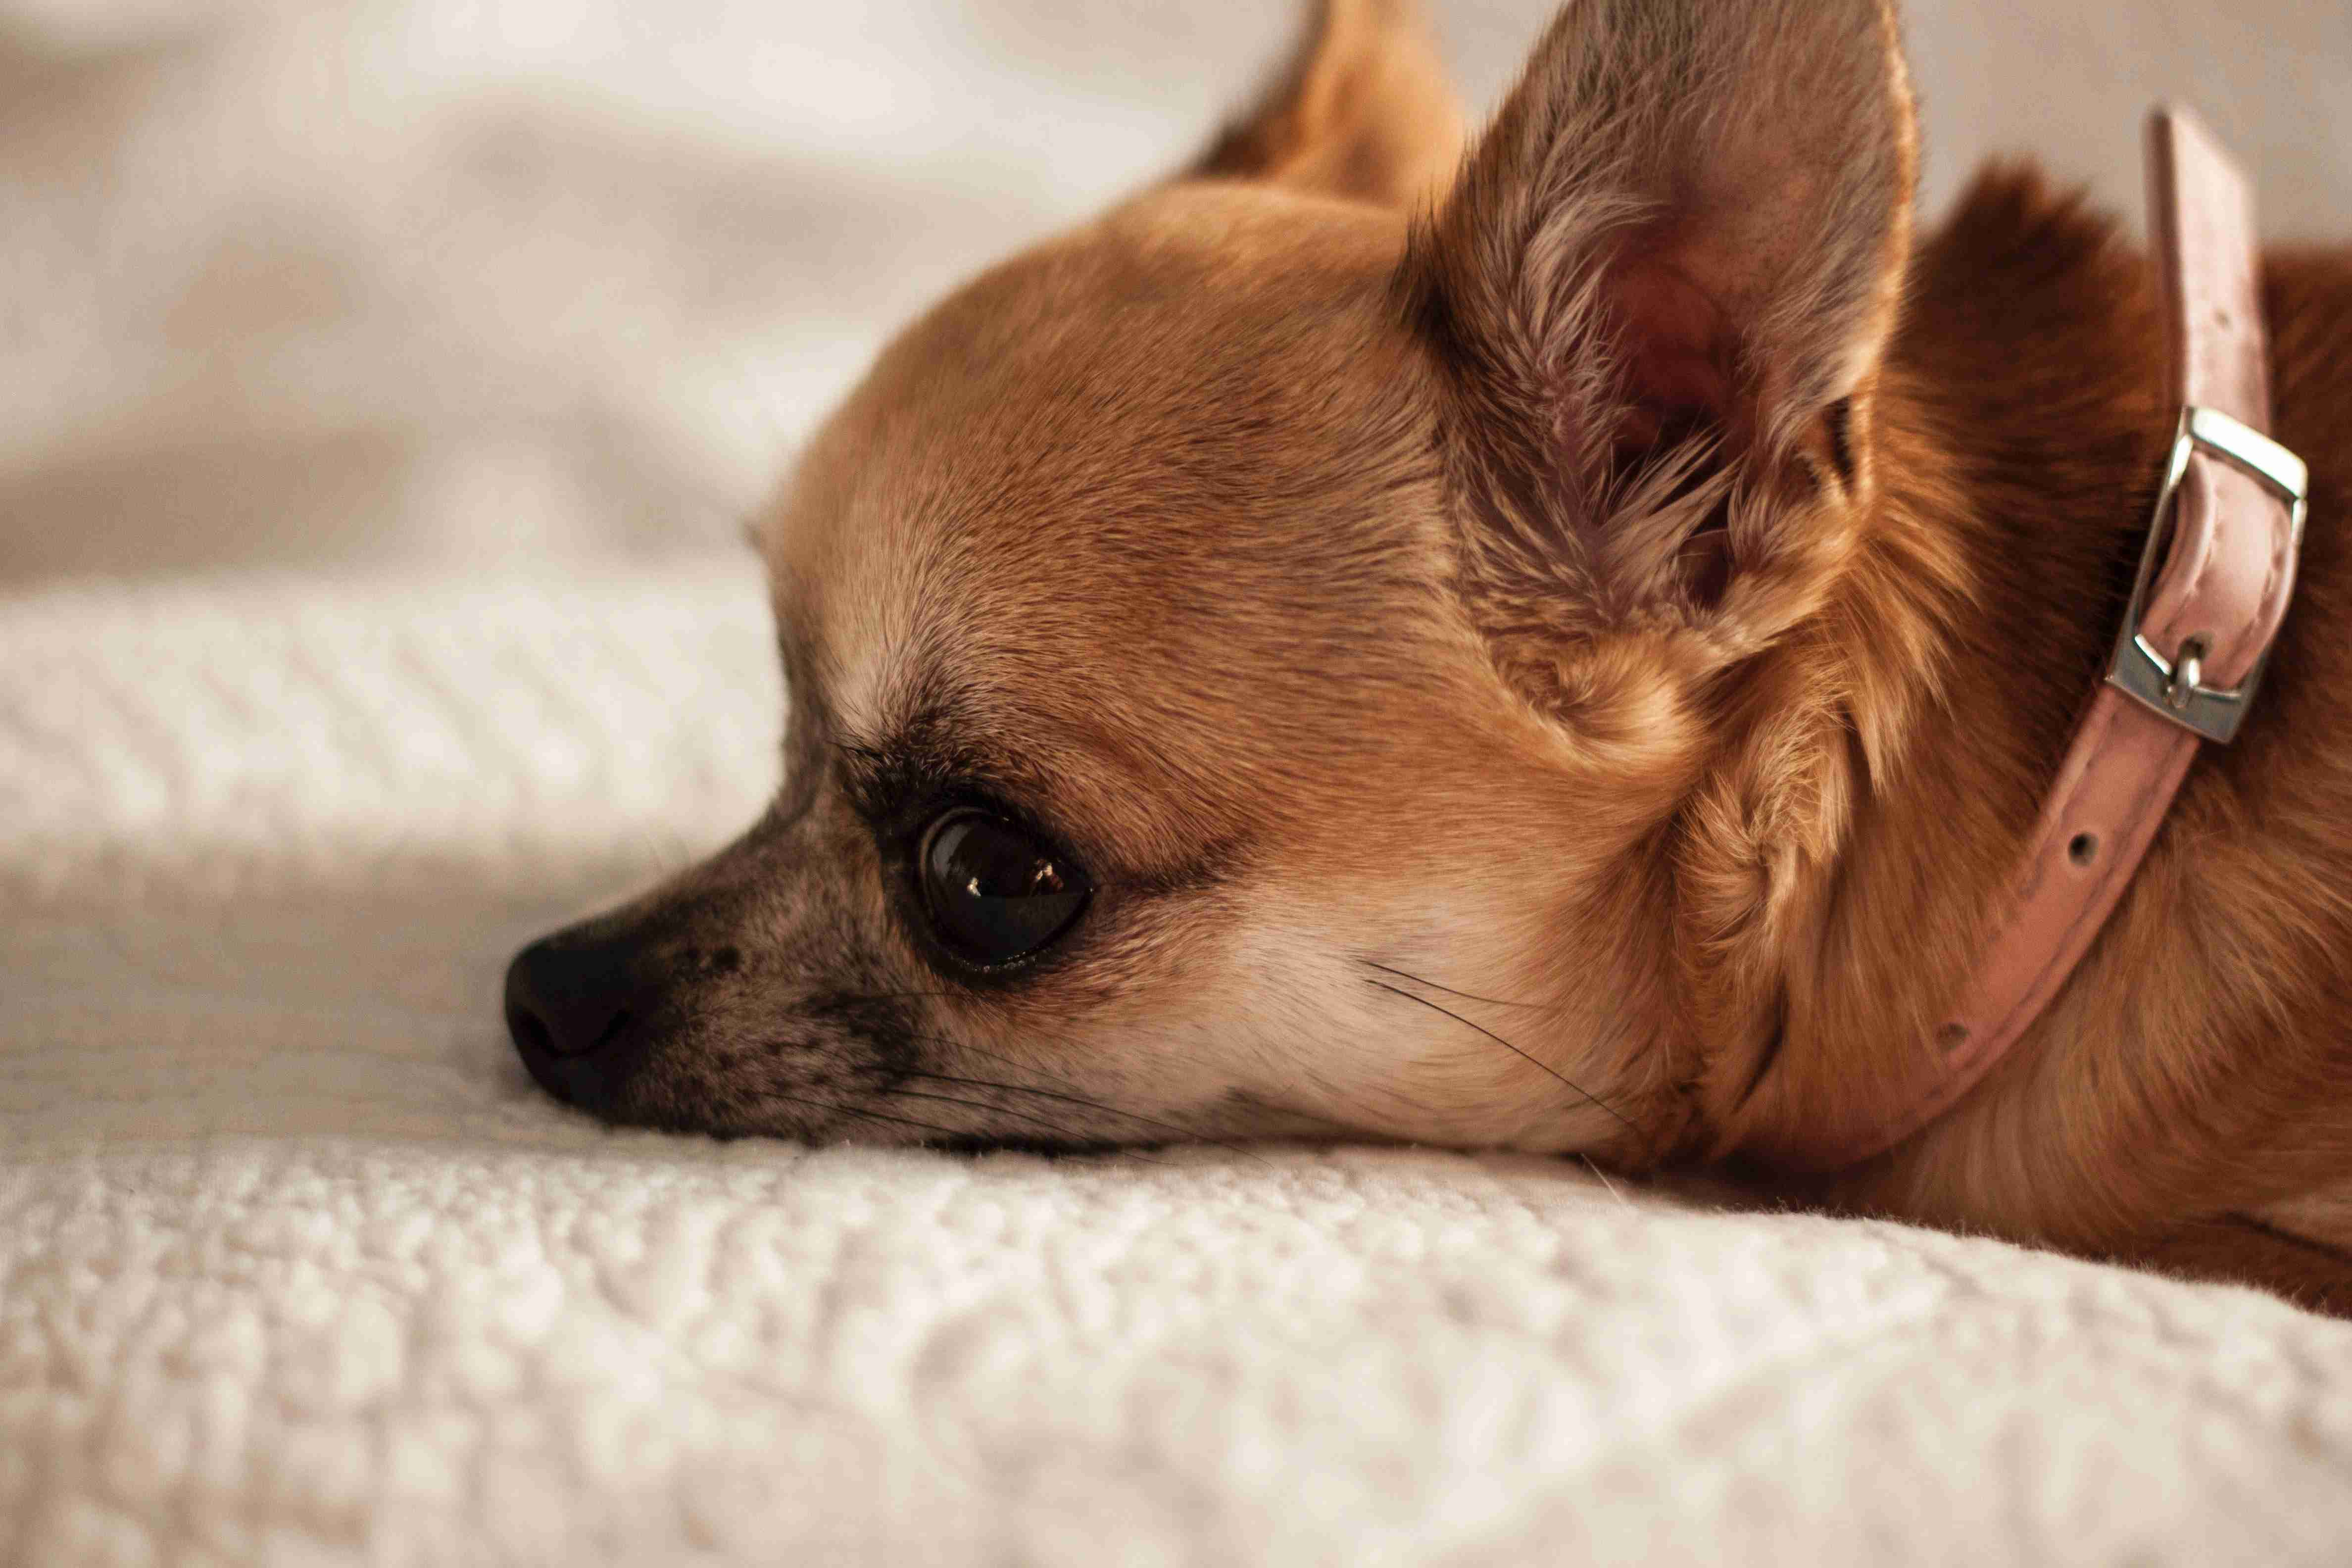 How can you effectively communicate with a Chihuahua to address their anger issues?